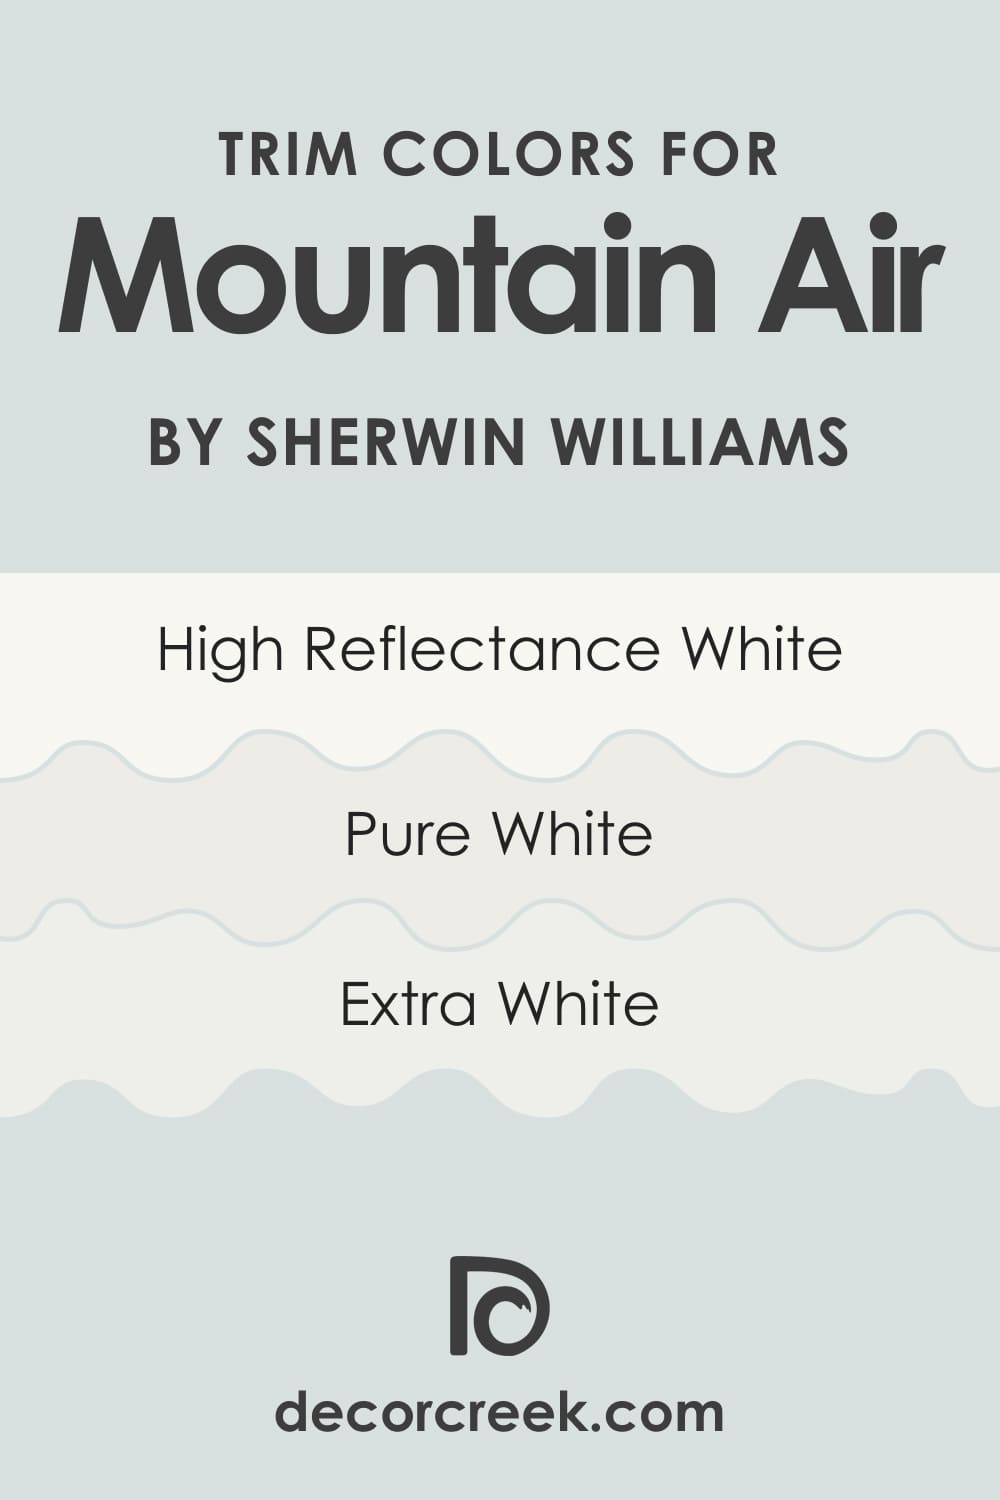 What’s the Best Trim Color To Use With SW Mountain Air?